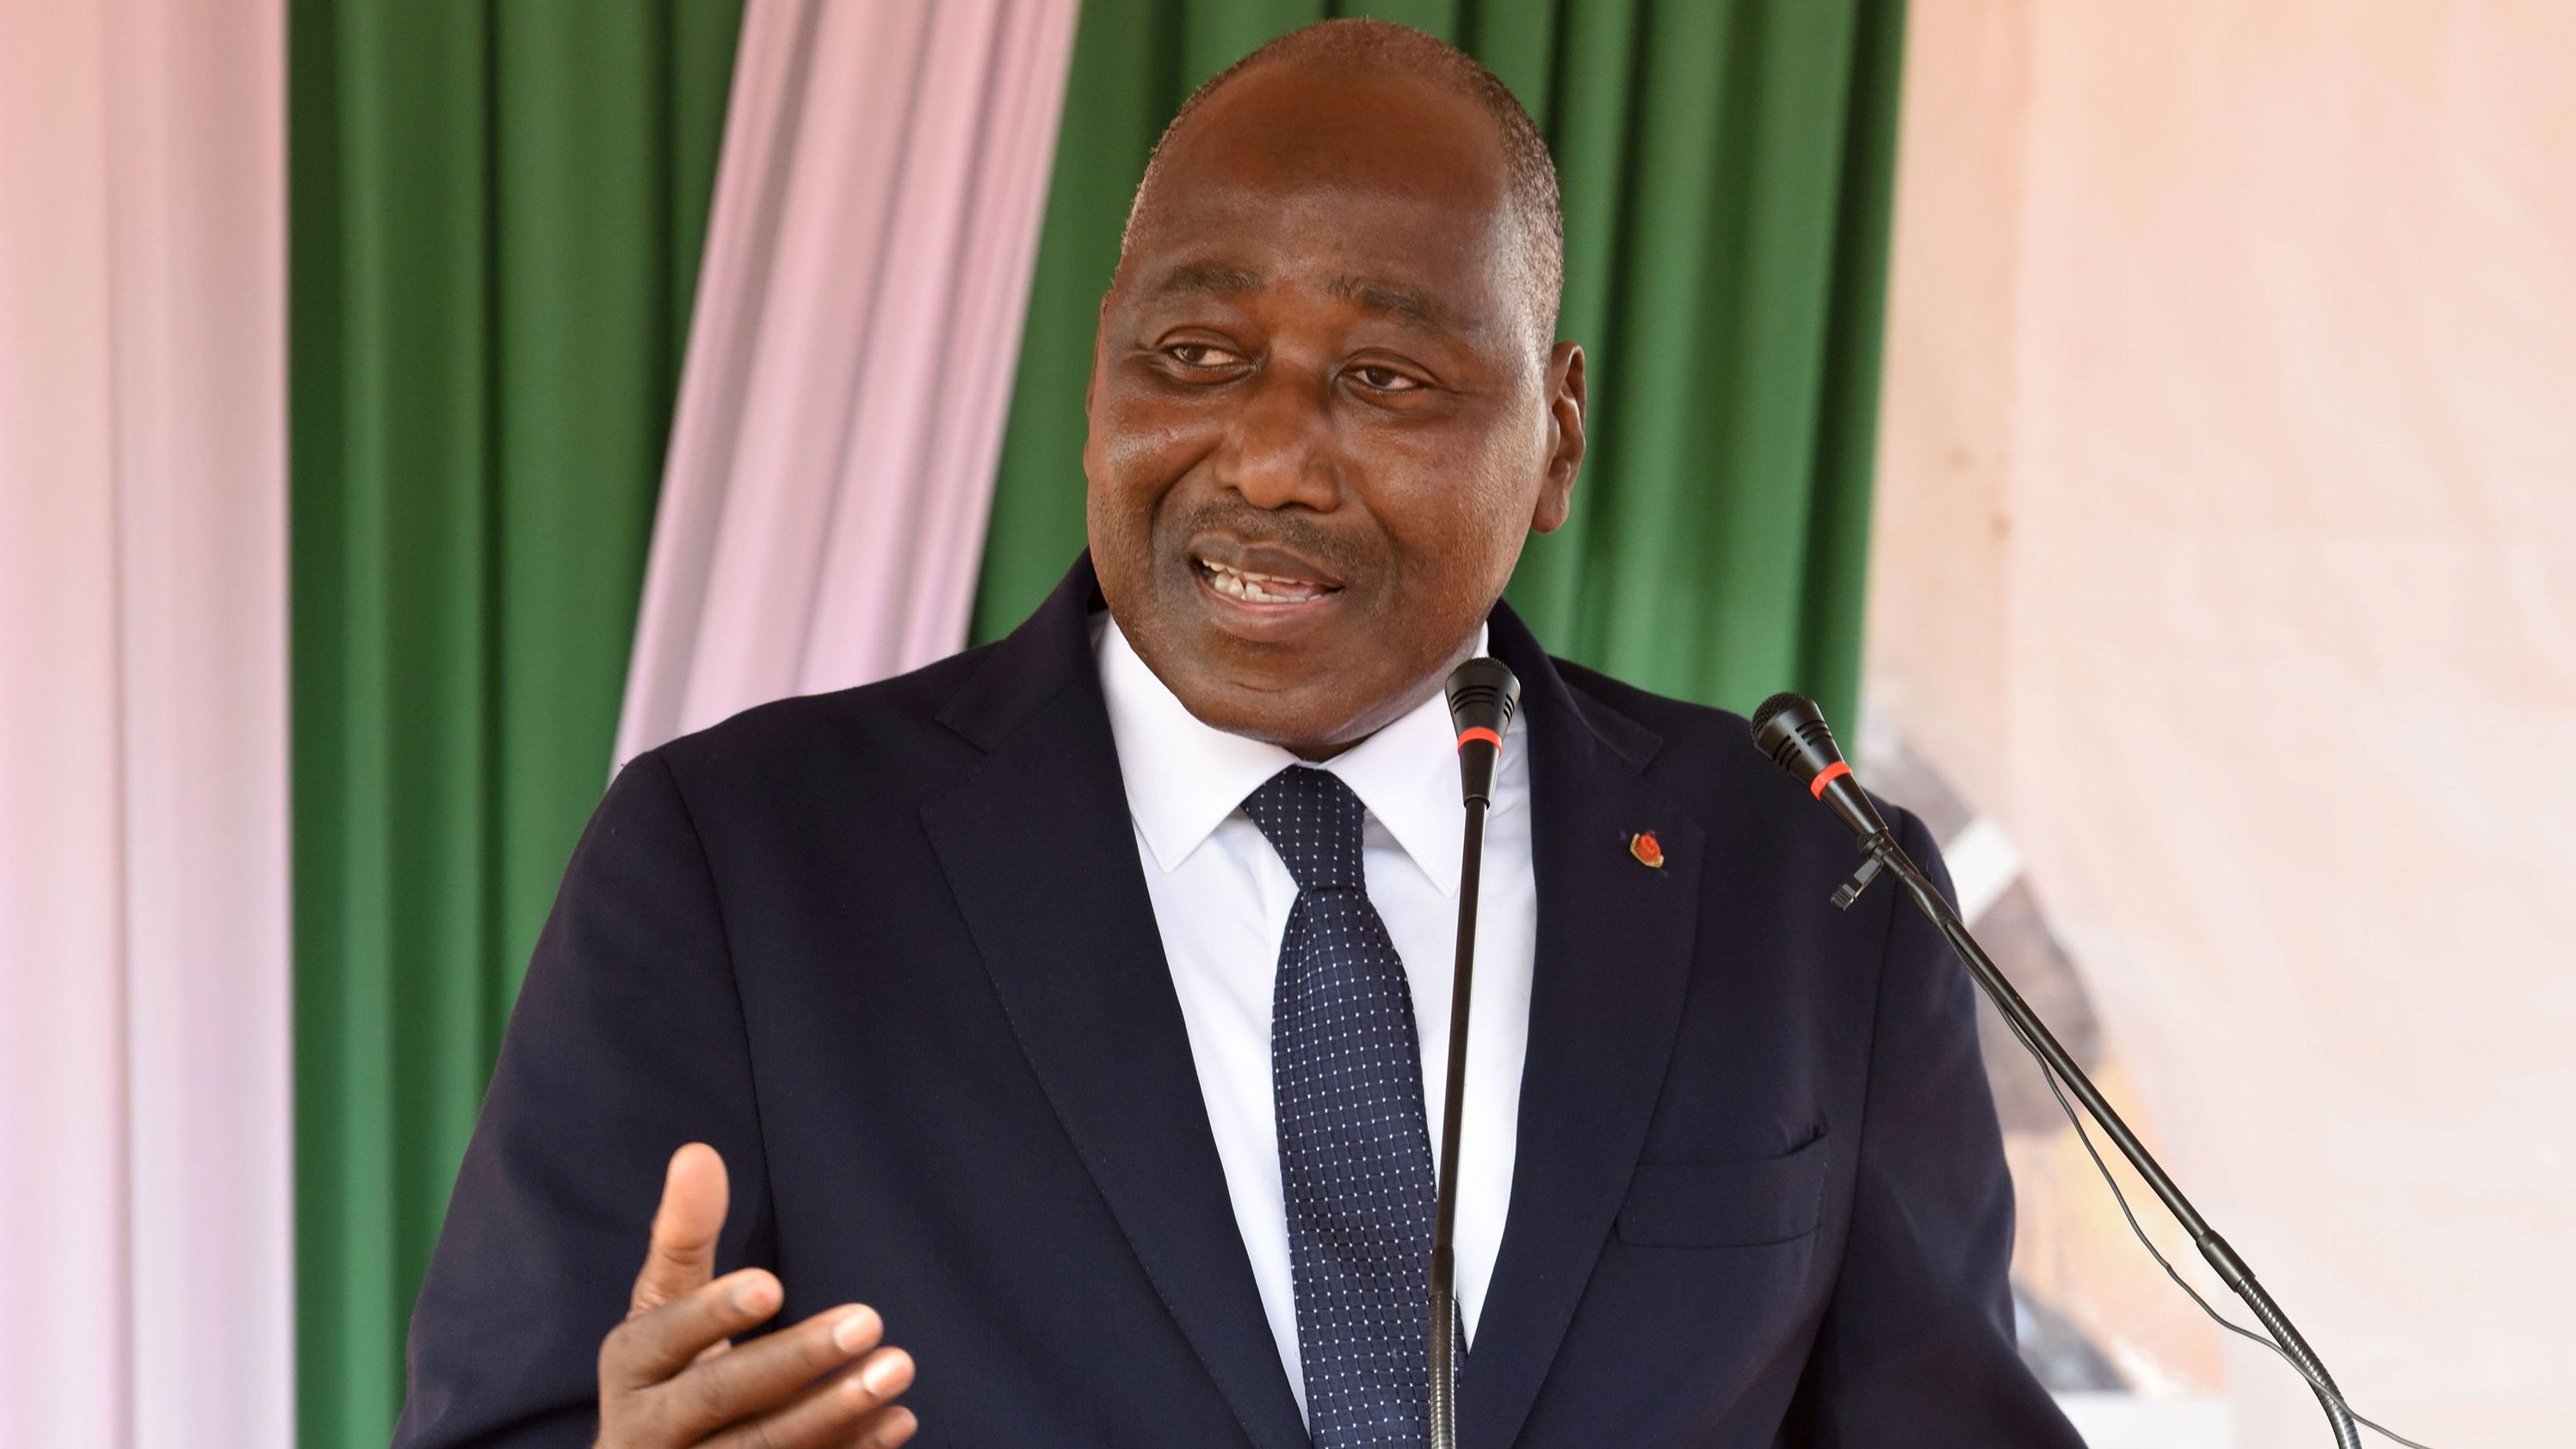 Prime Minister Amadou Gon Coulibaly speaks during an event on May 9, 2019.